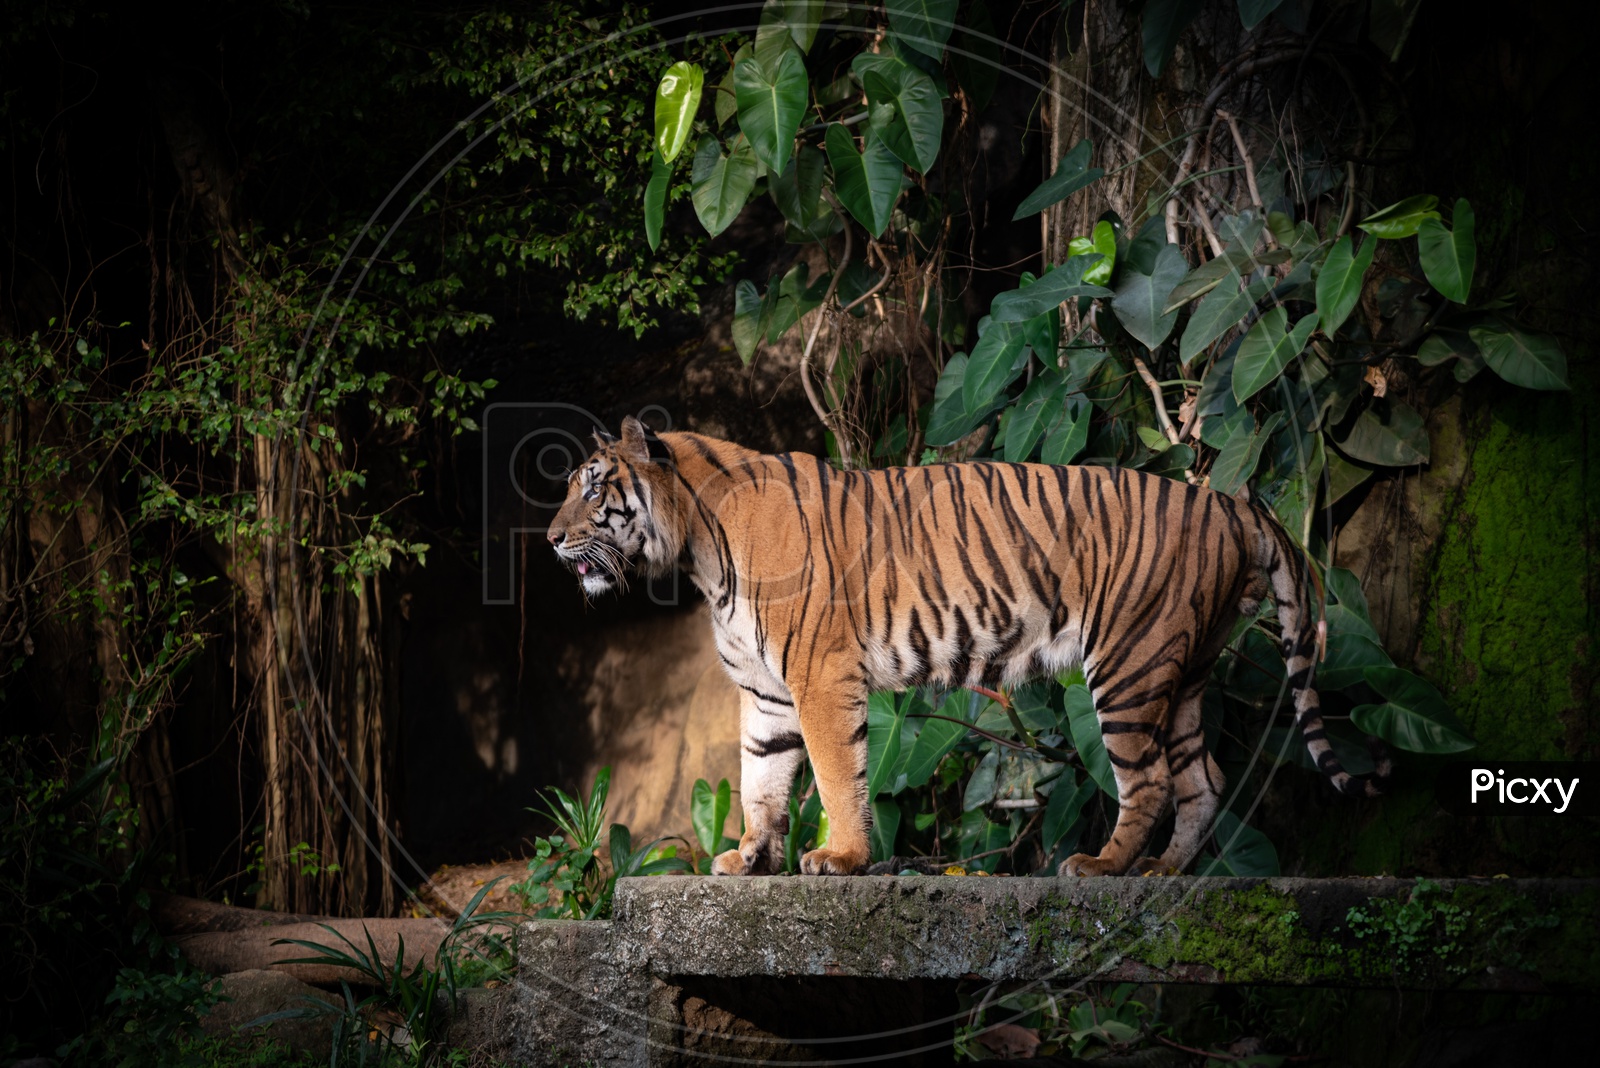 A Bengal Tiger standing in a Zoo